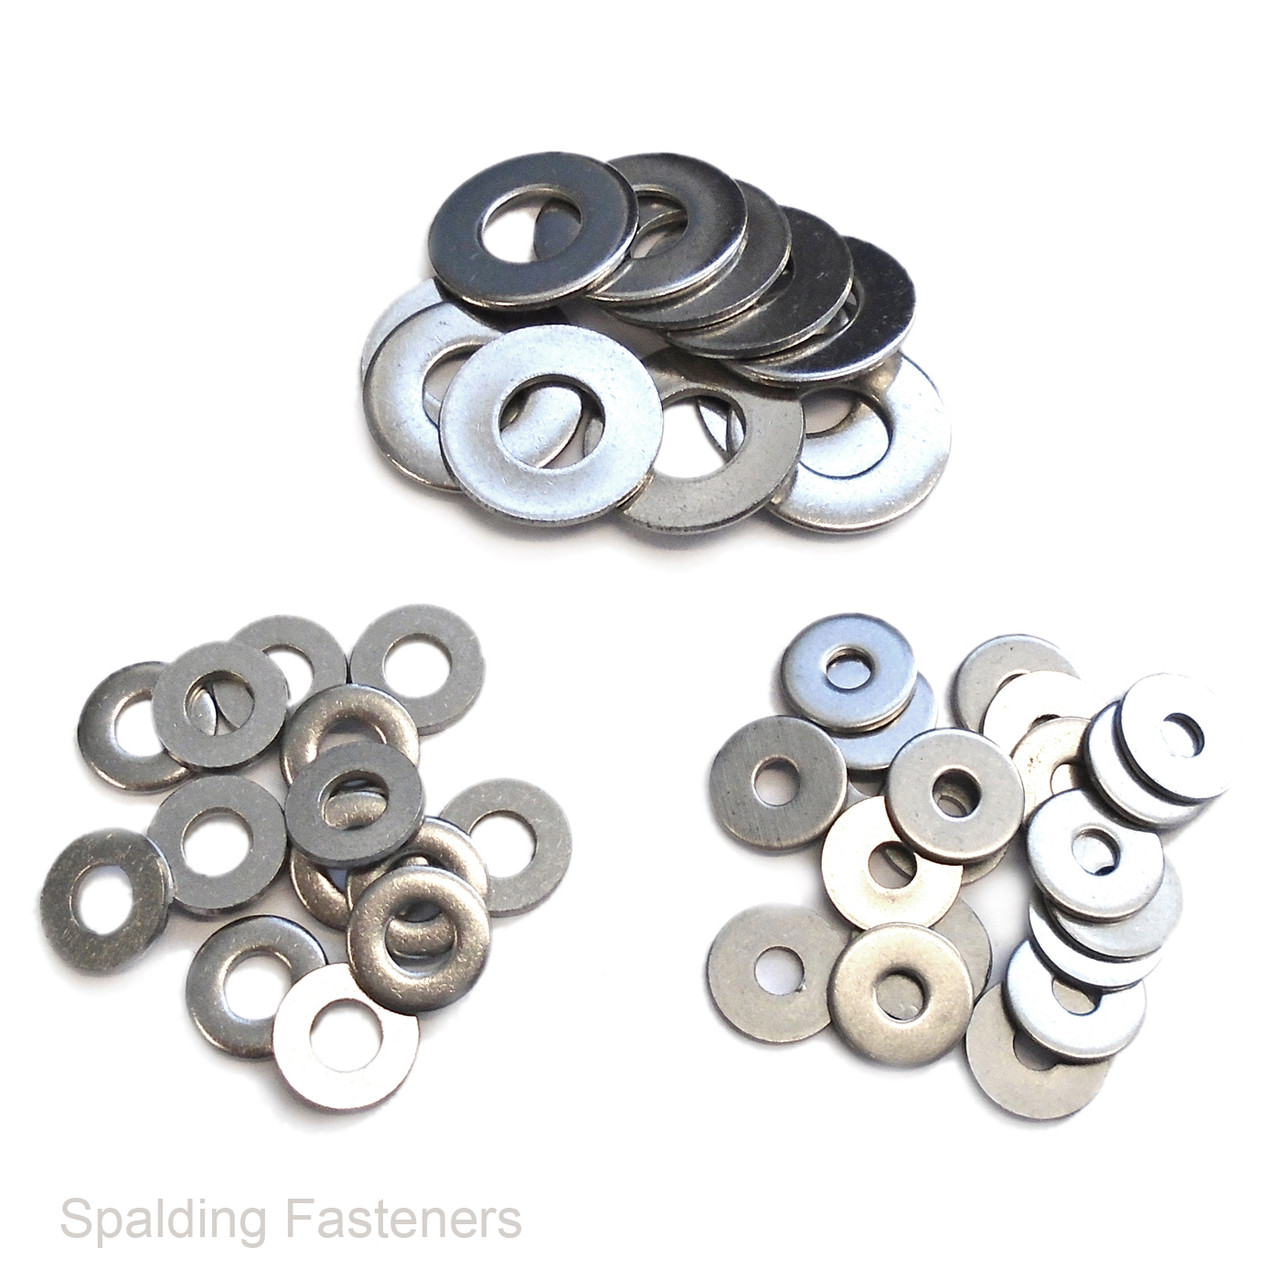 Assorted 3/16" To 1/2" Imperial A2 Stainless Steel Flat Washers